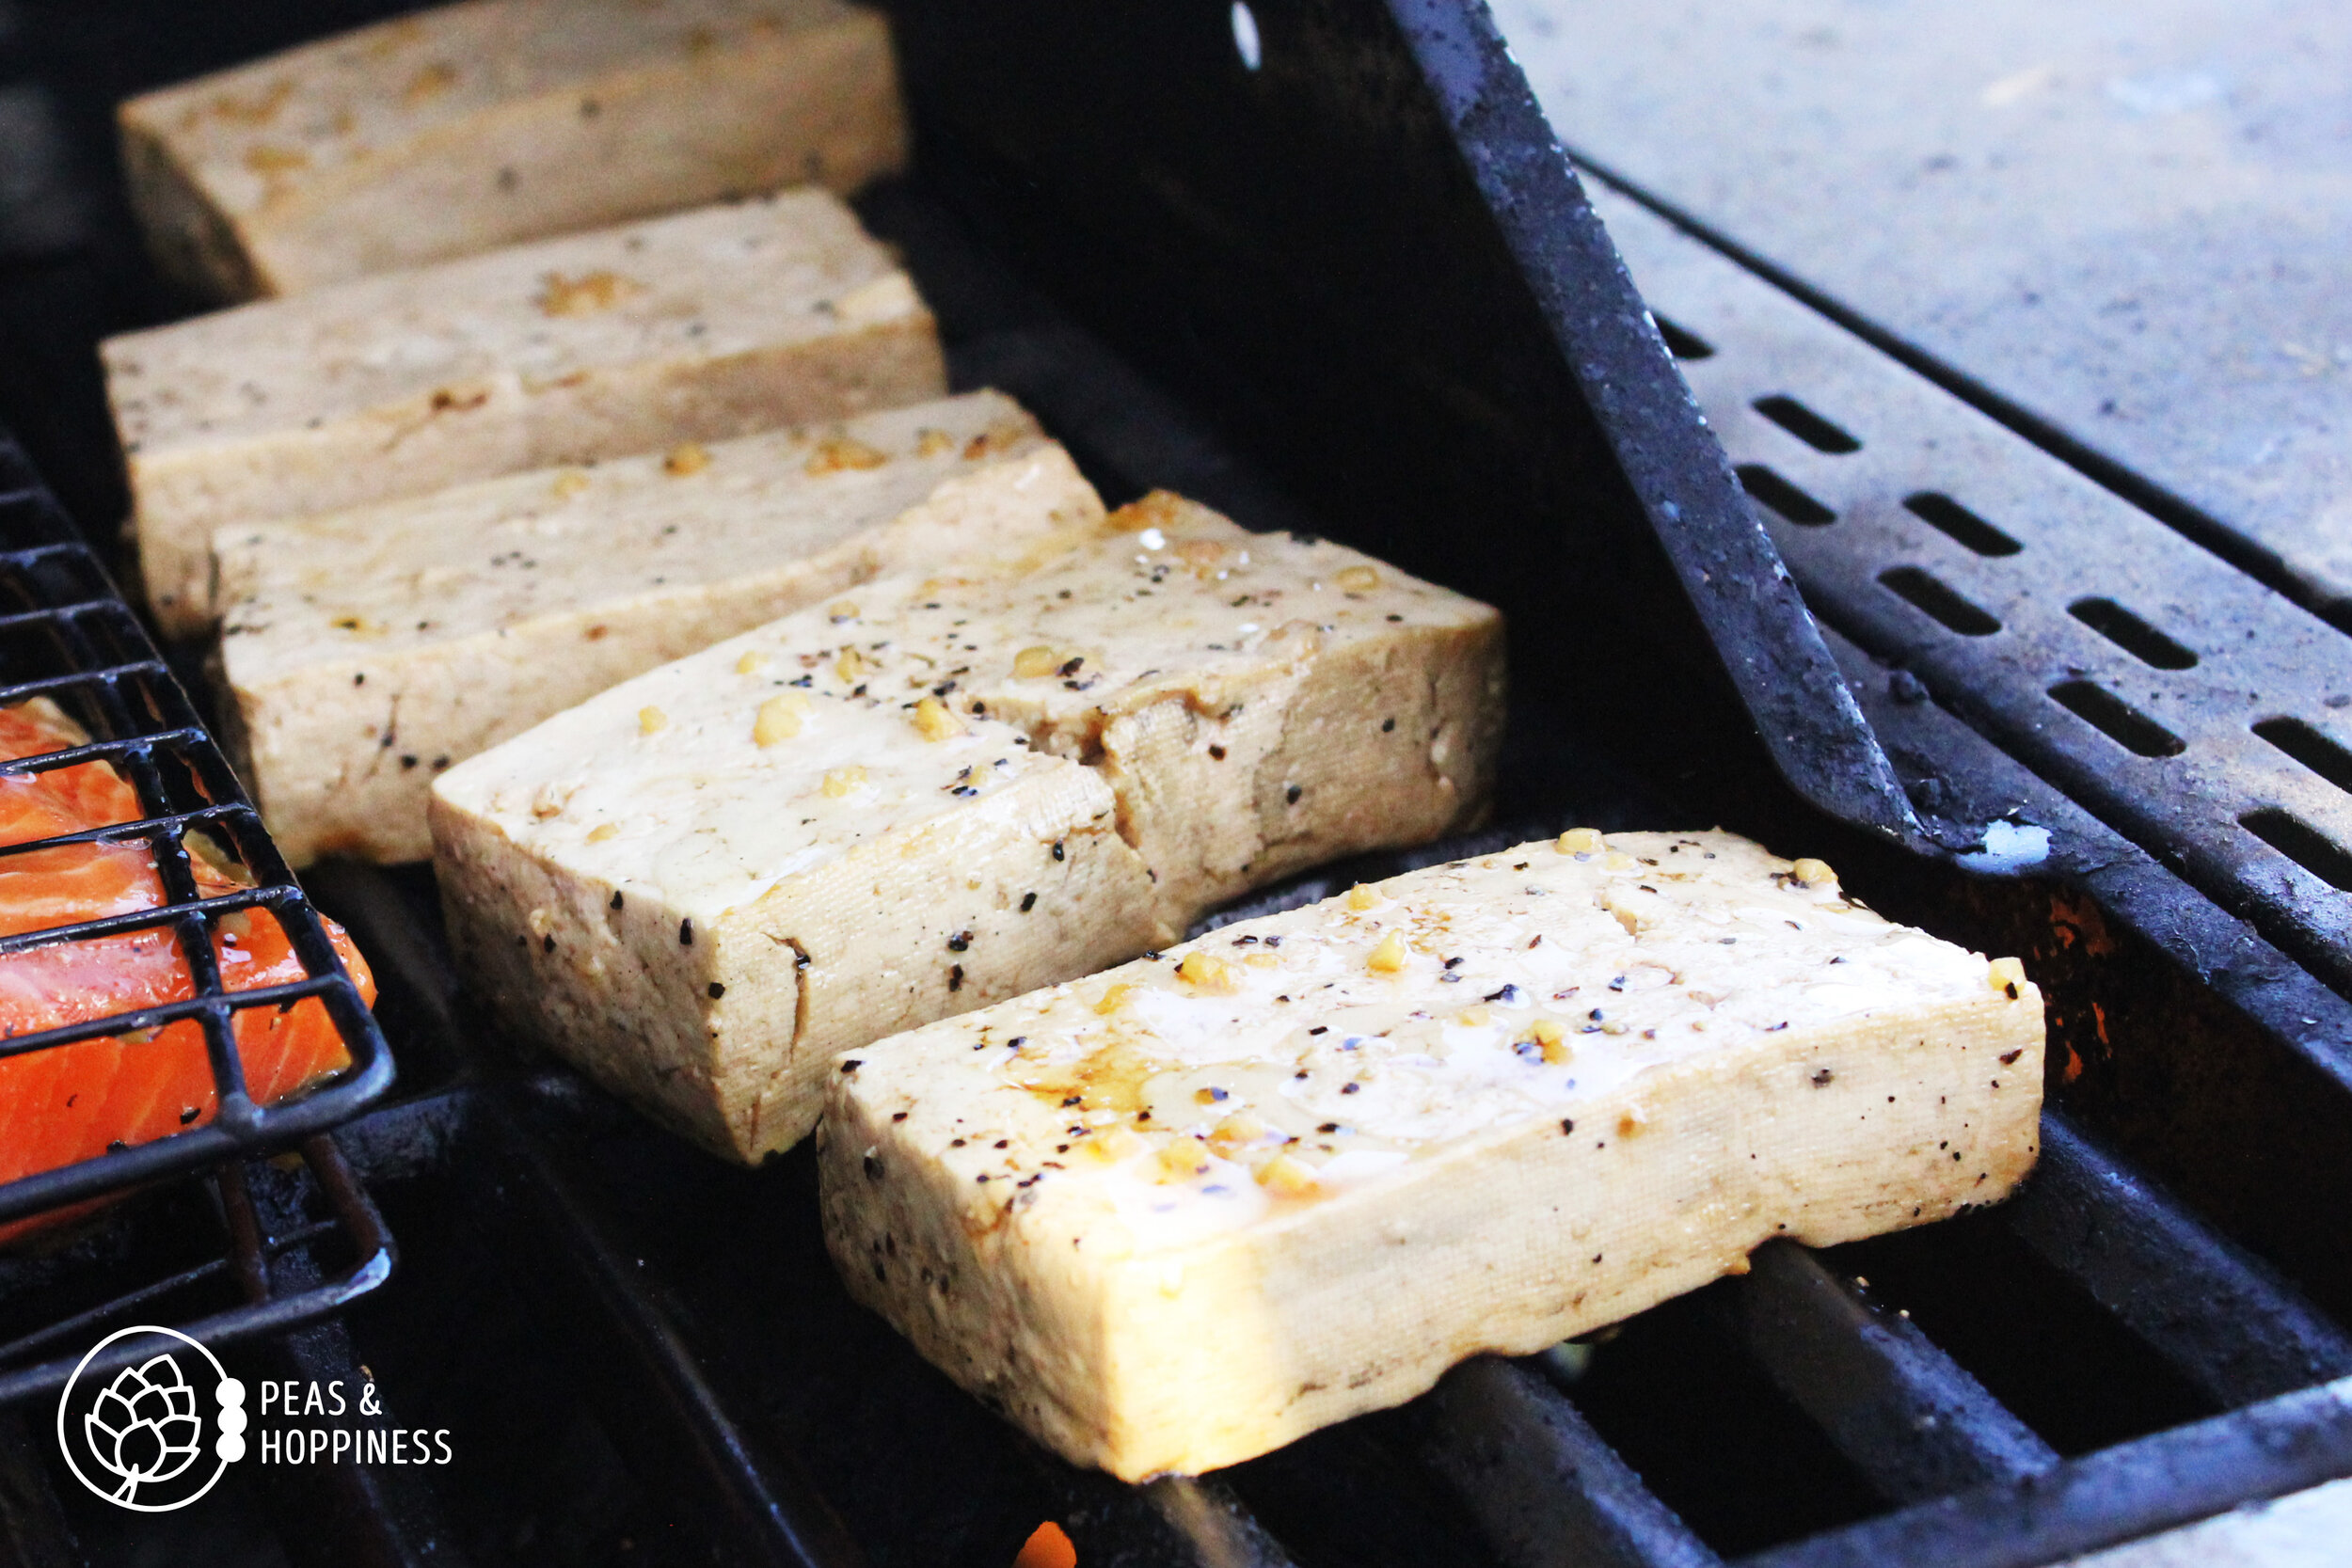 Soy protein, such as tofu, includes phytoestrogens which have been hypothesized to lower risk of breast cancer